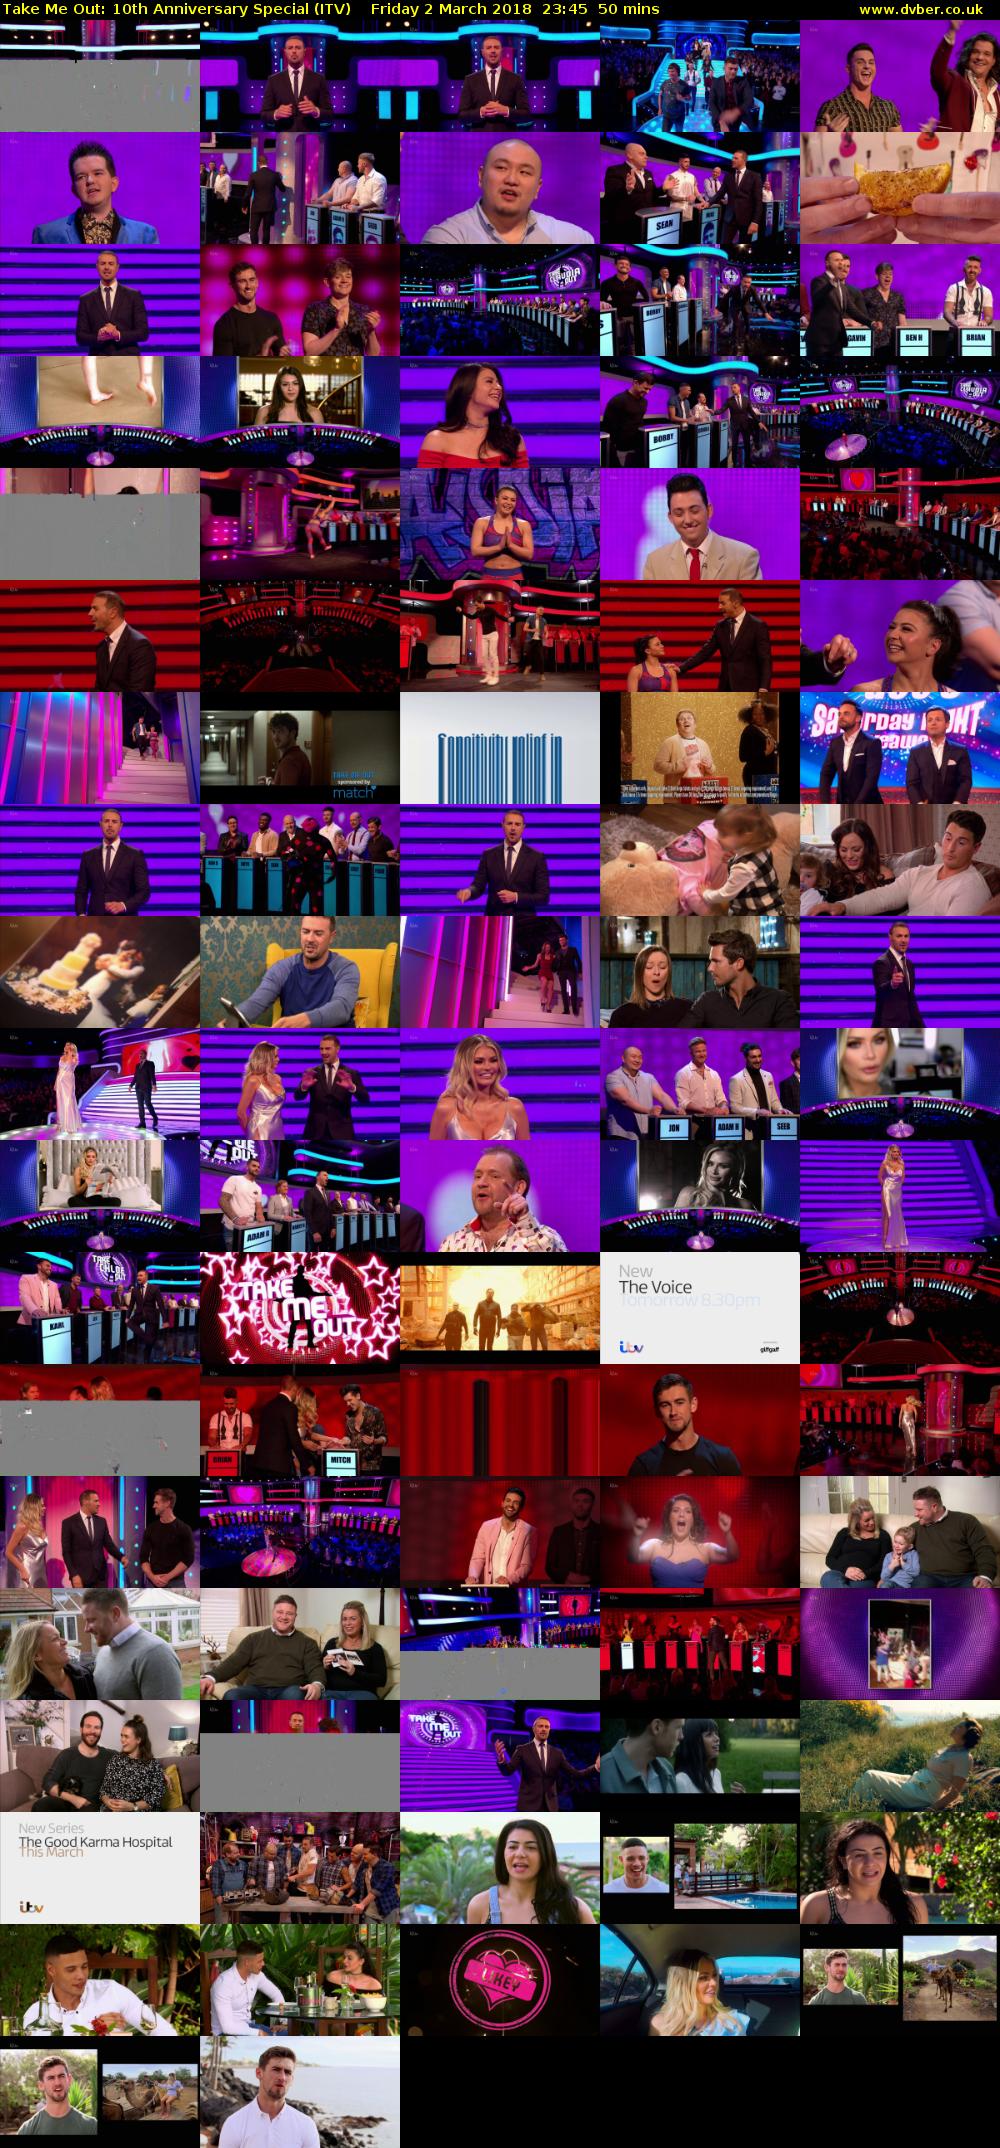 Take Me Out: 10th Anniversary Special (ITV HD) 2018 03 02 2345